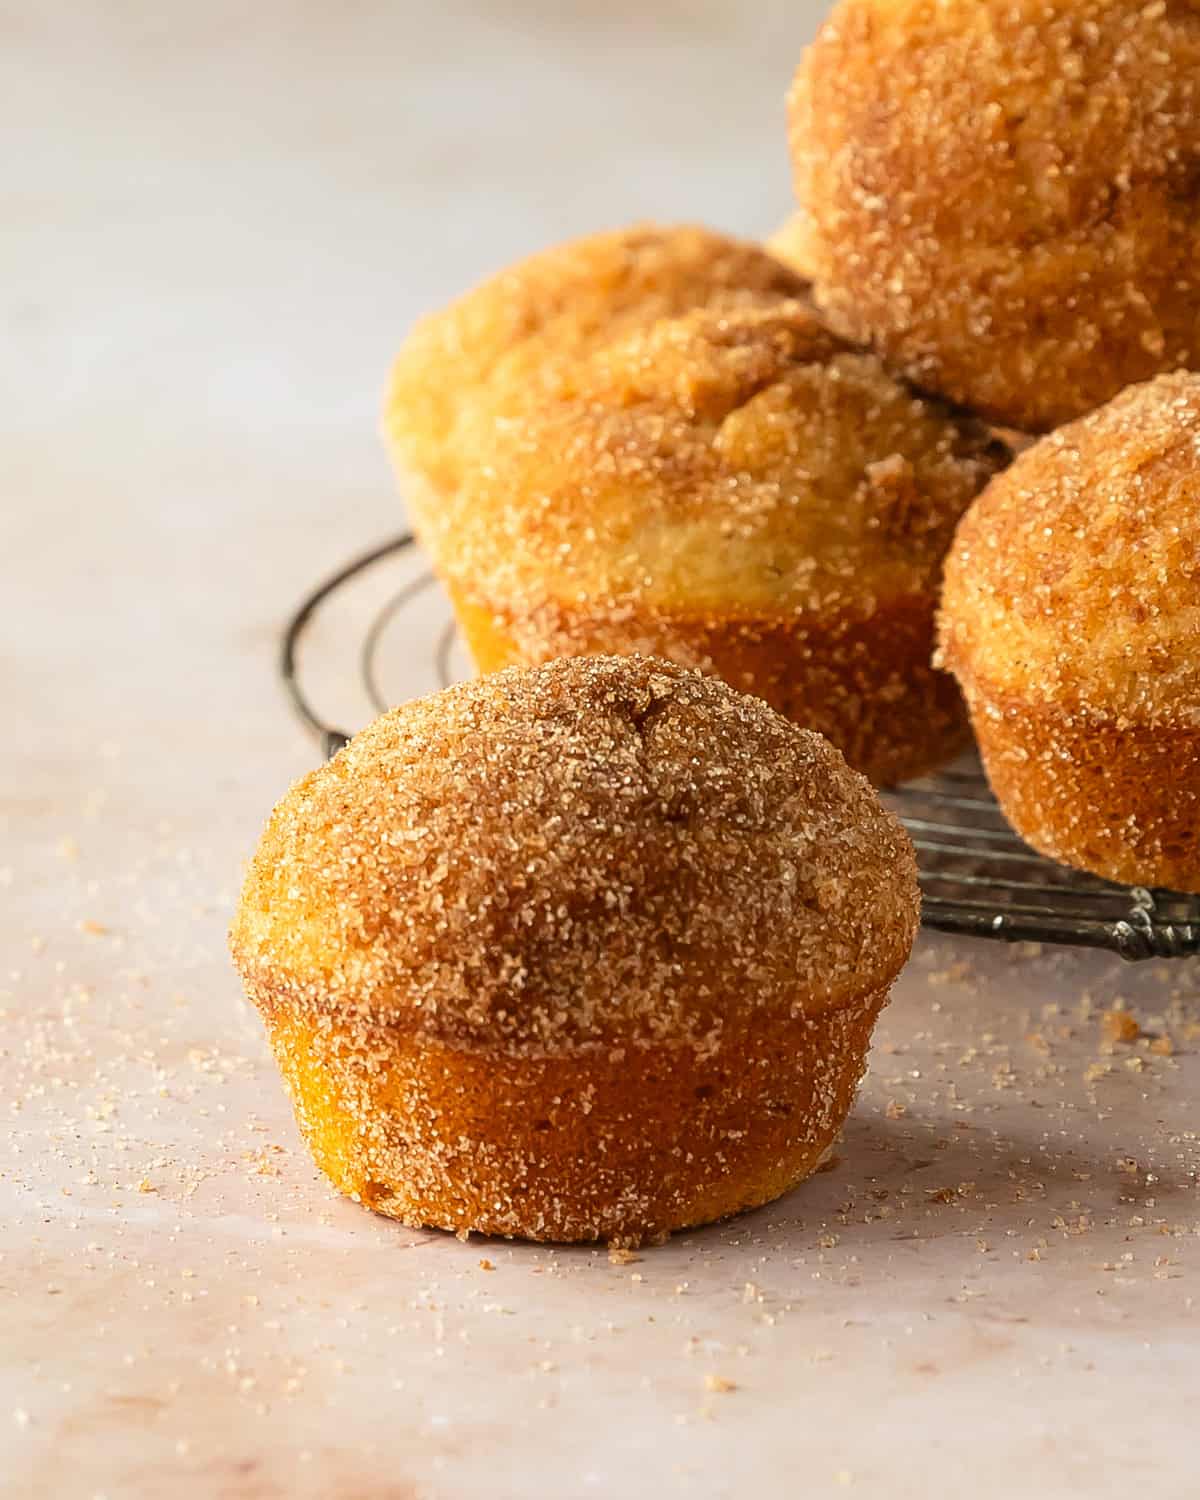 Cinnamon muffins are deliciously soft, moist and fluffy cinnamon spiced vanilla muffins with beautiful domed tops.  Once baked, these delightful breakfast muffins are dipped in melted butter and rolled in cinnamon sugar. They’re quick and easy muffins that are perfect for breakfasts or snacks. 